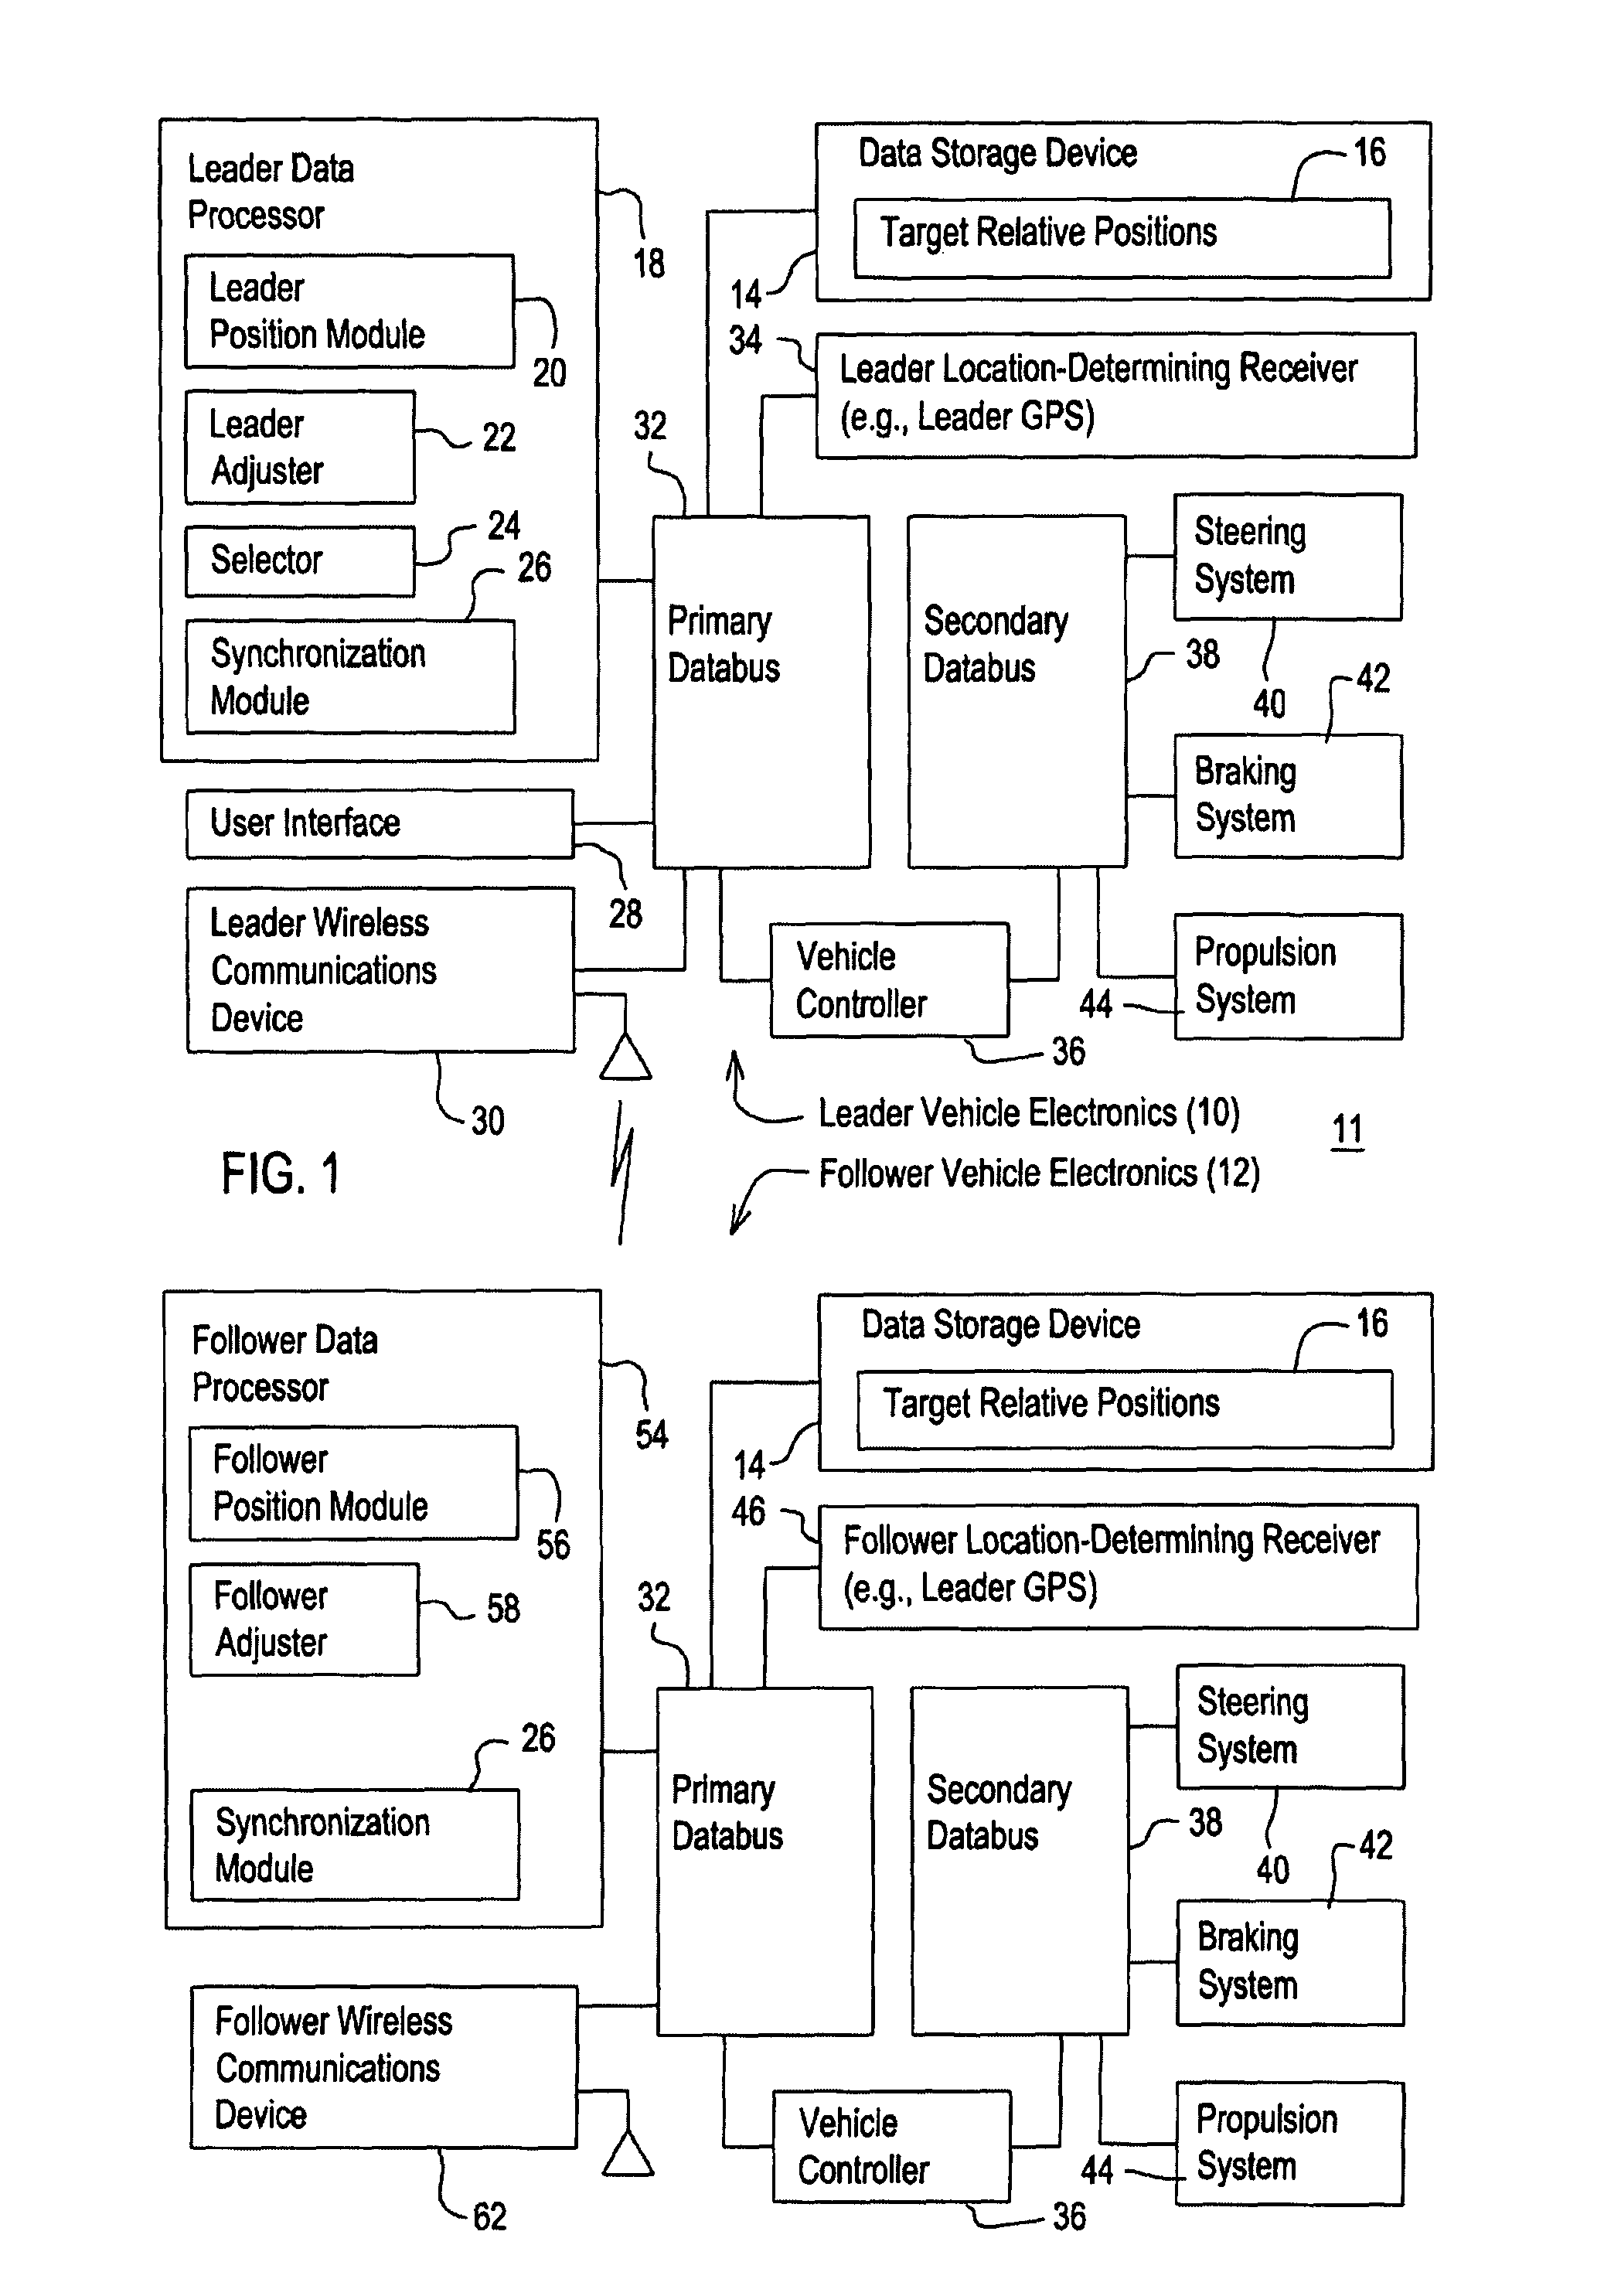 Method and system for controlling the loading of a container associated with a vehicle